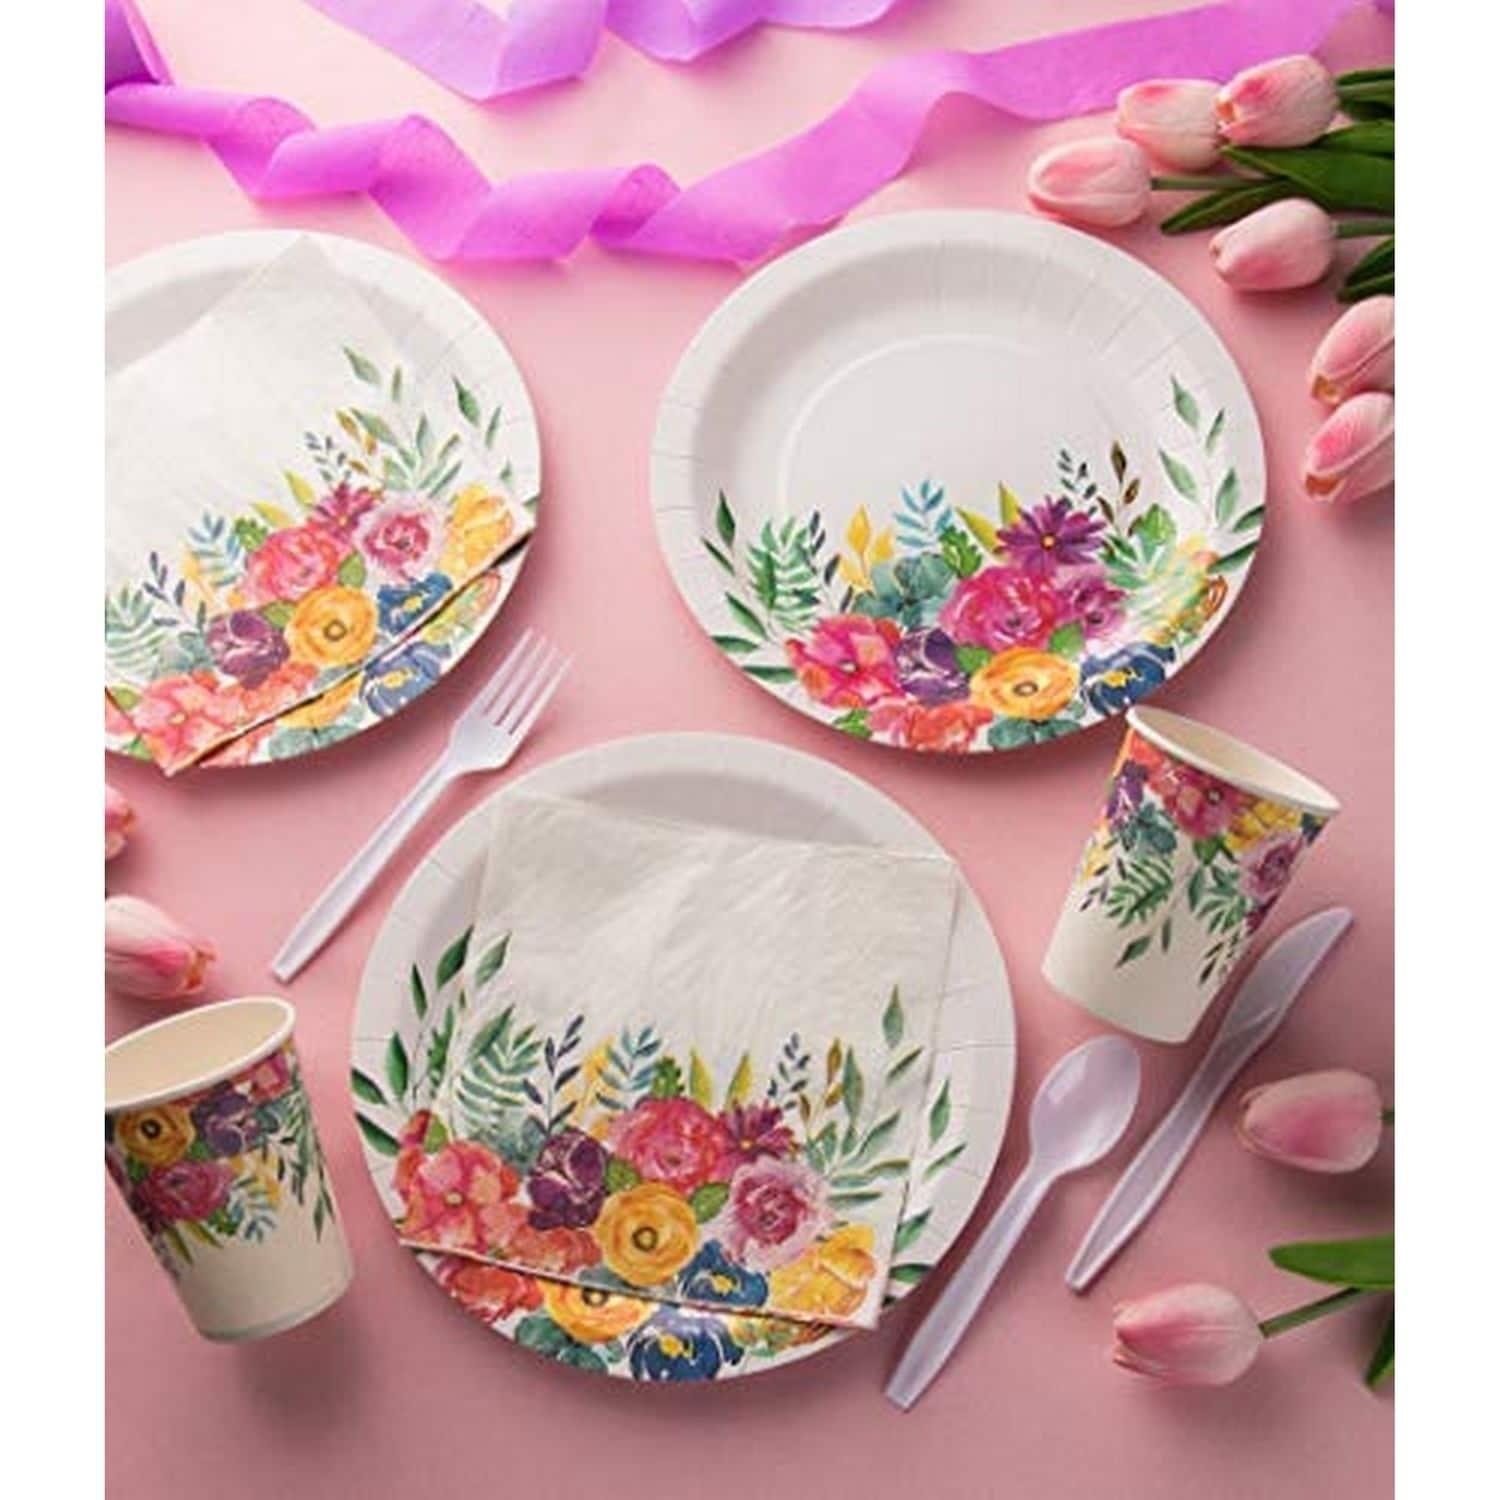 80-Pack Vintage-Style Floral Paper Plates, 9 Inch for Tea Party, Wedding,  Bridal, Baby Shower